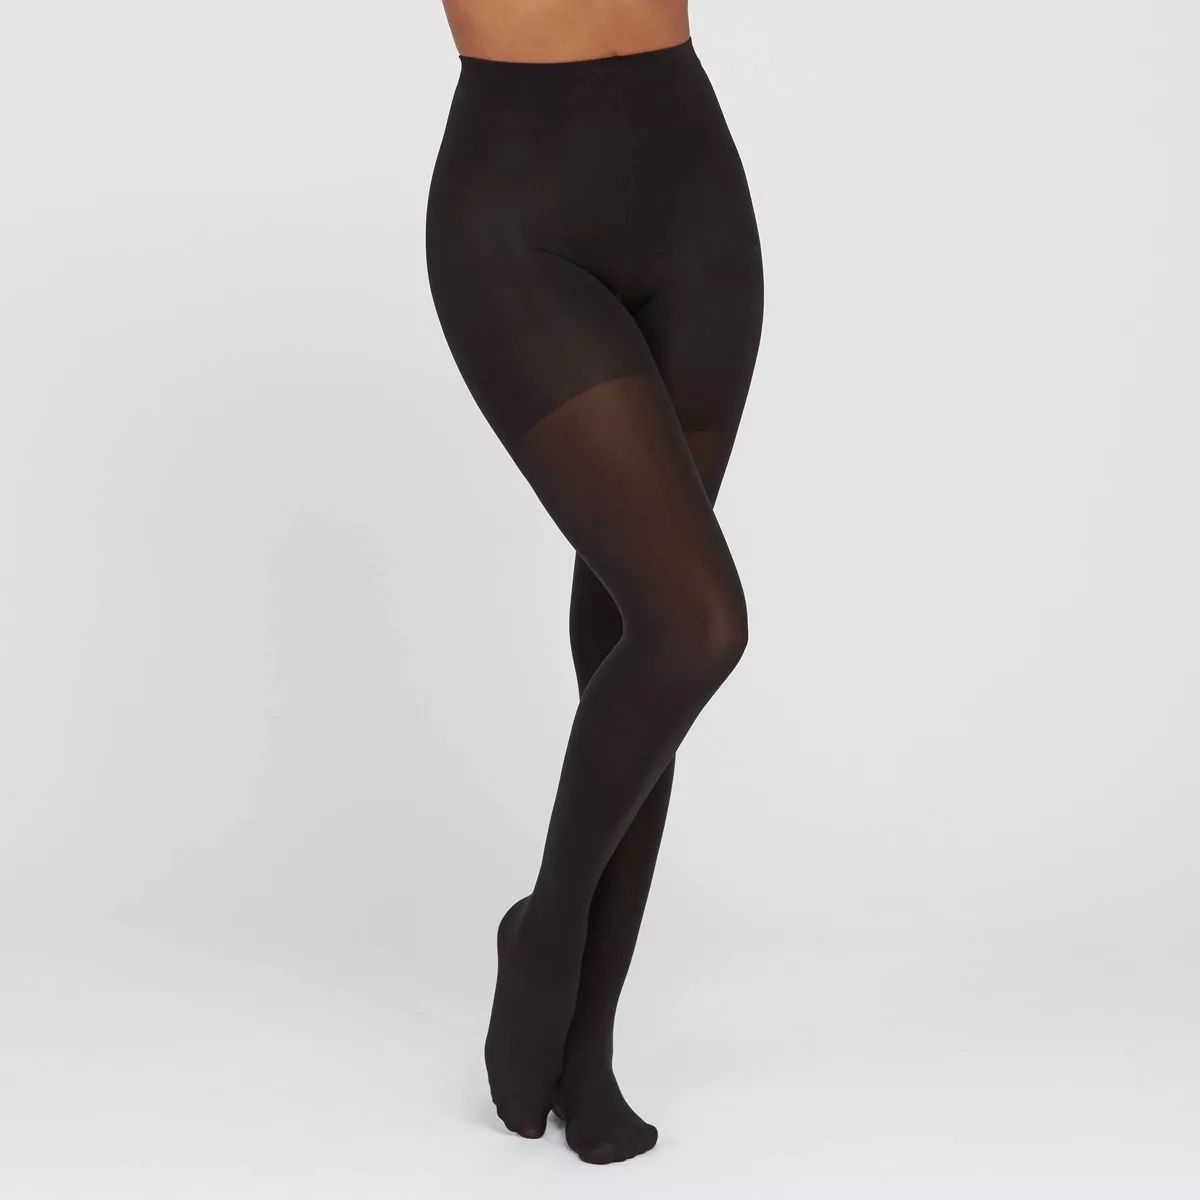 ASSETS by SPANX Women's Original Shaping Tights - Black 3 | Target